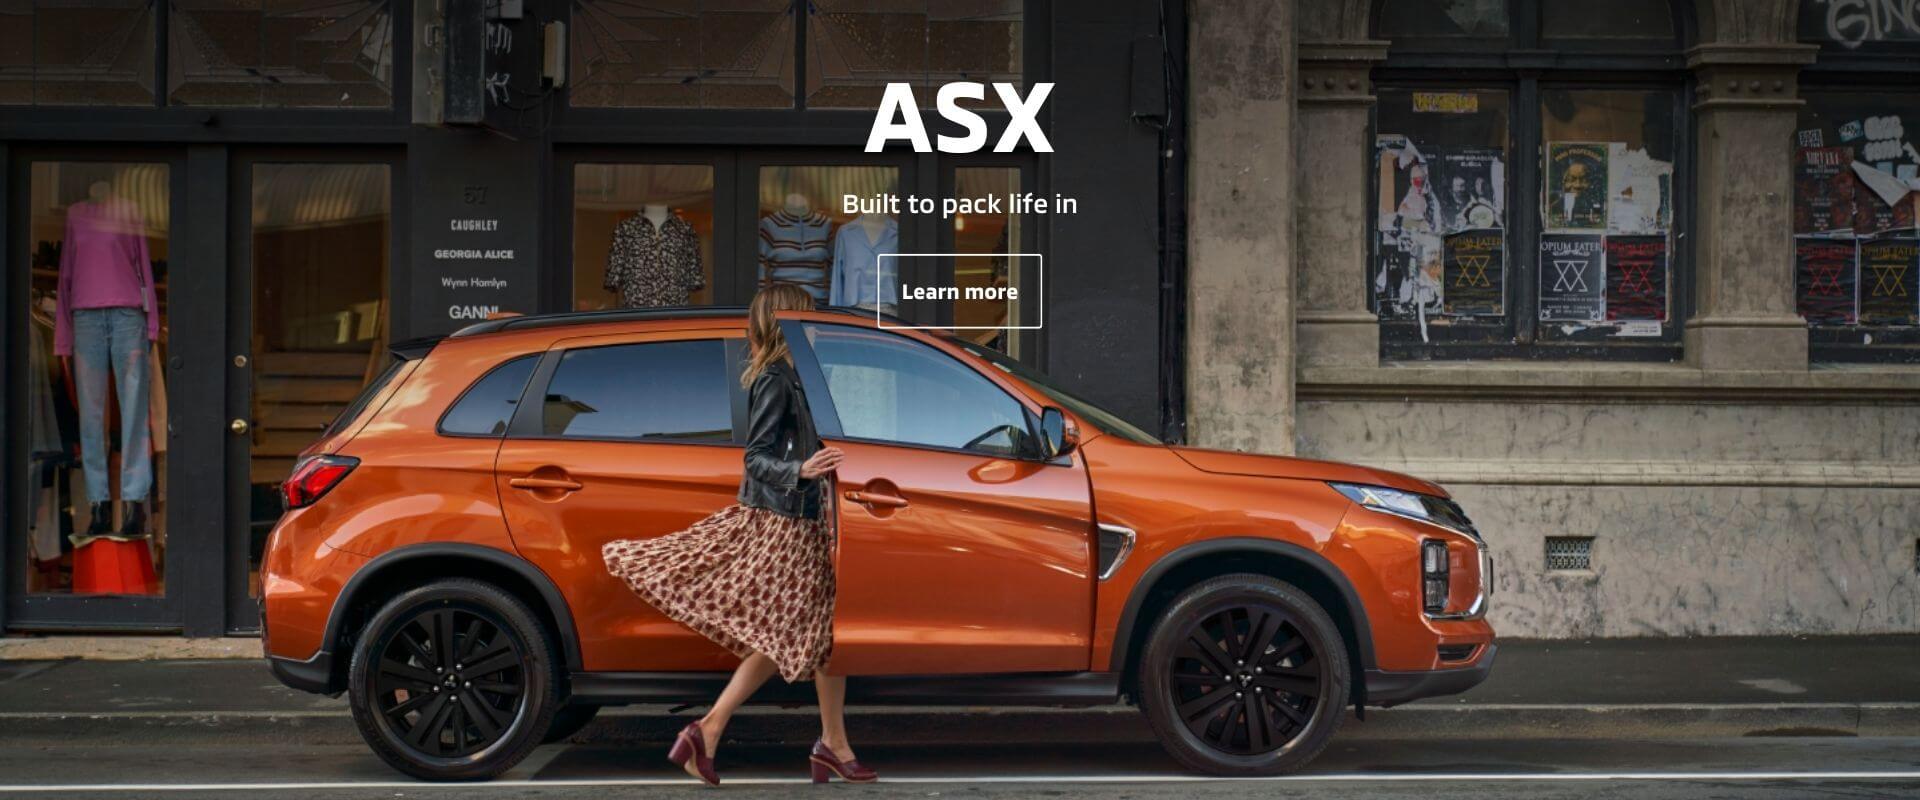 ASX. Built to pack life in. Learn more.